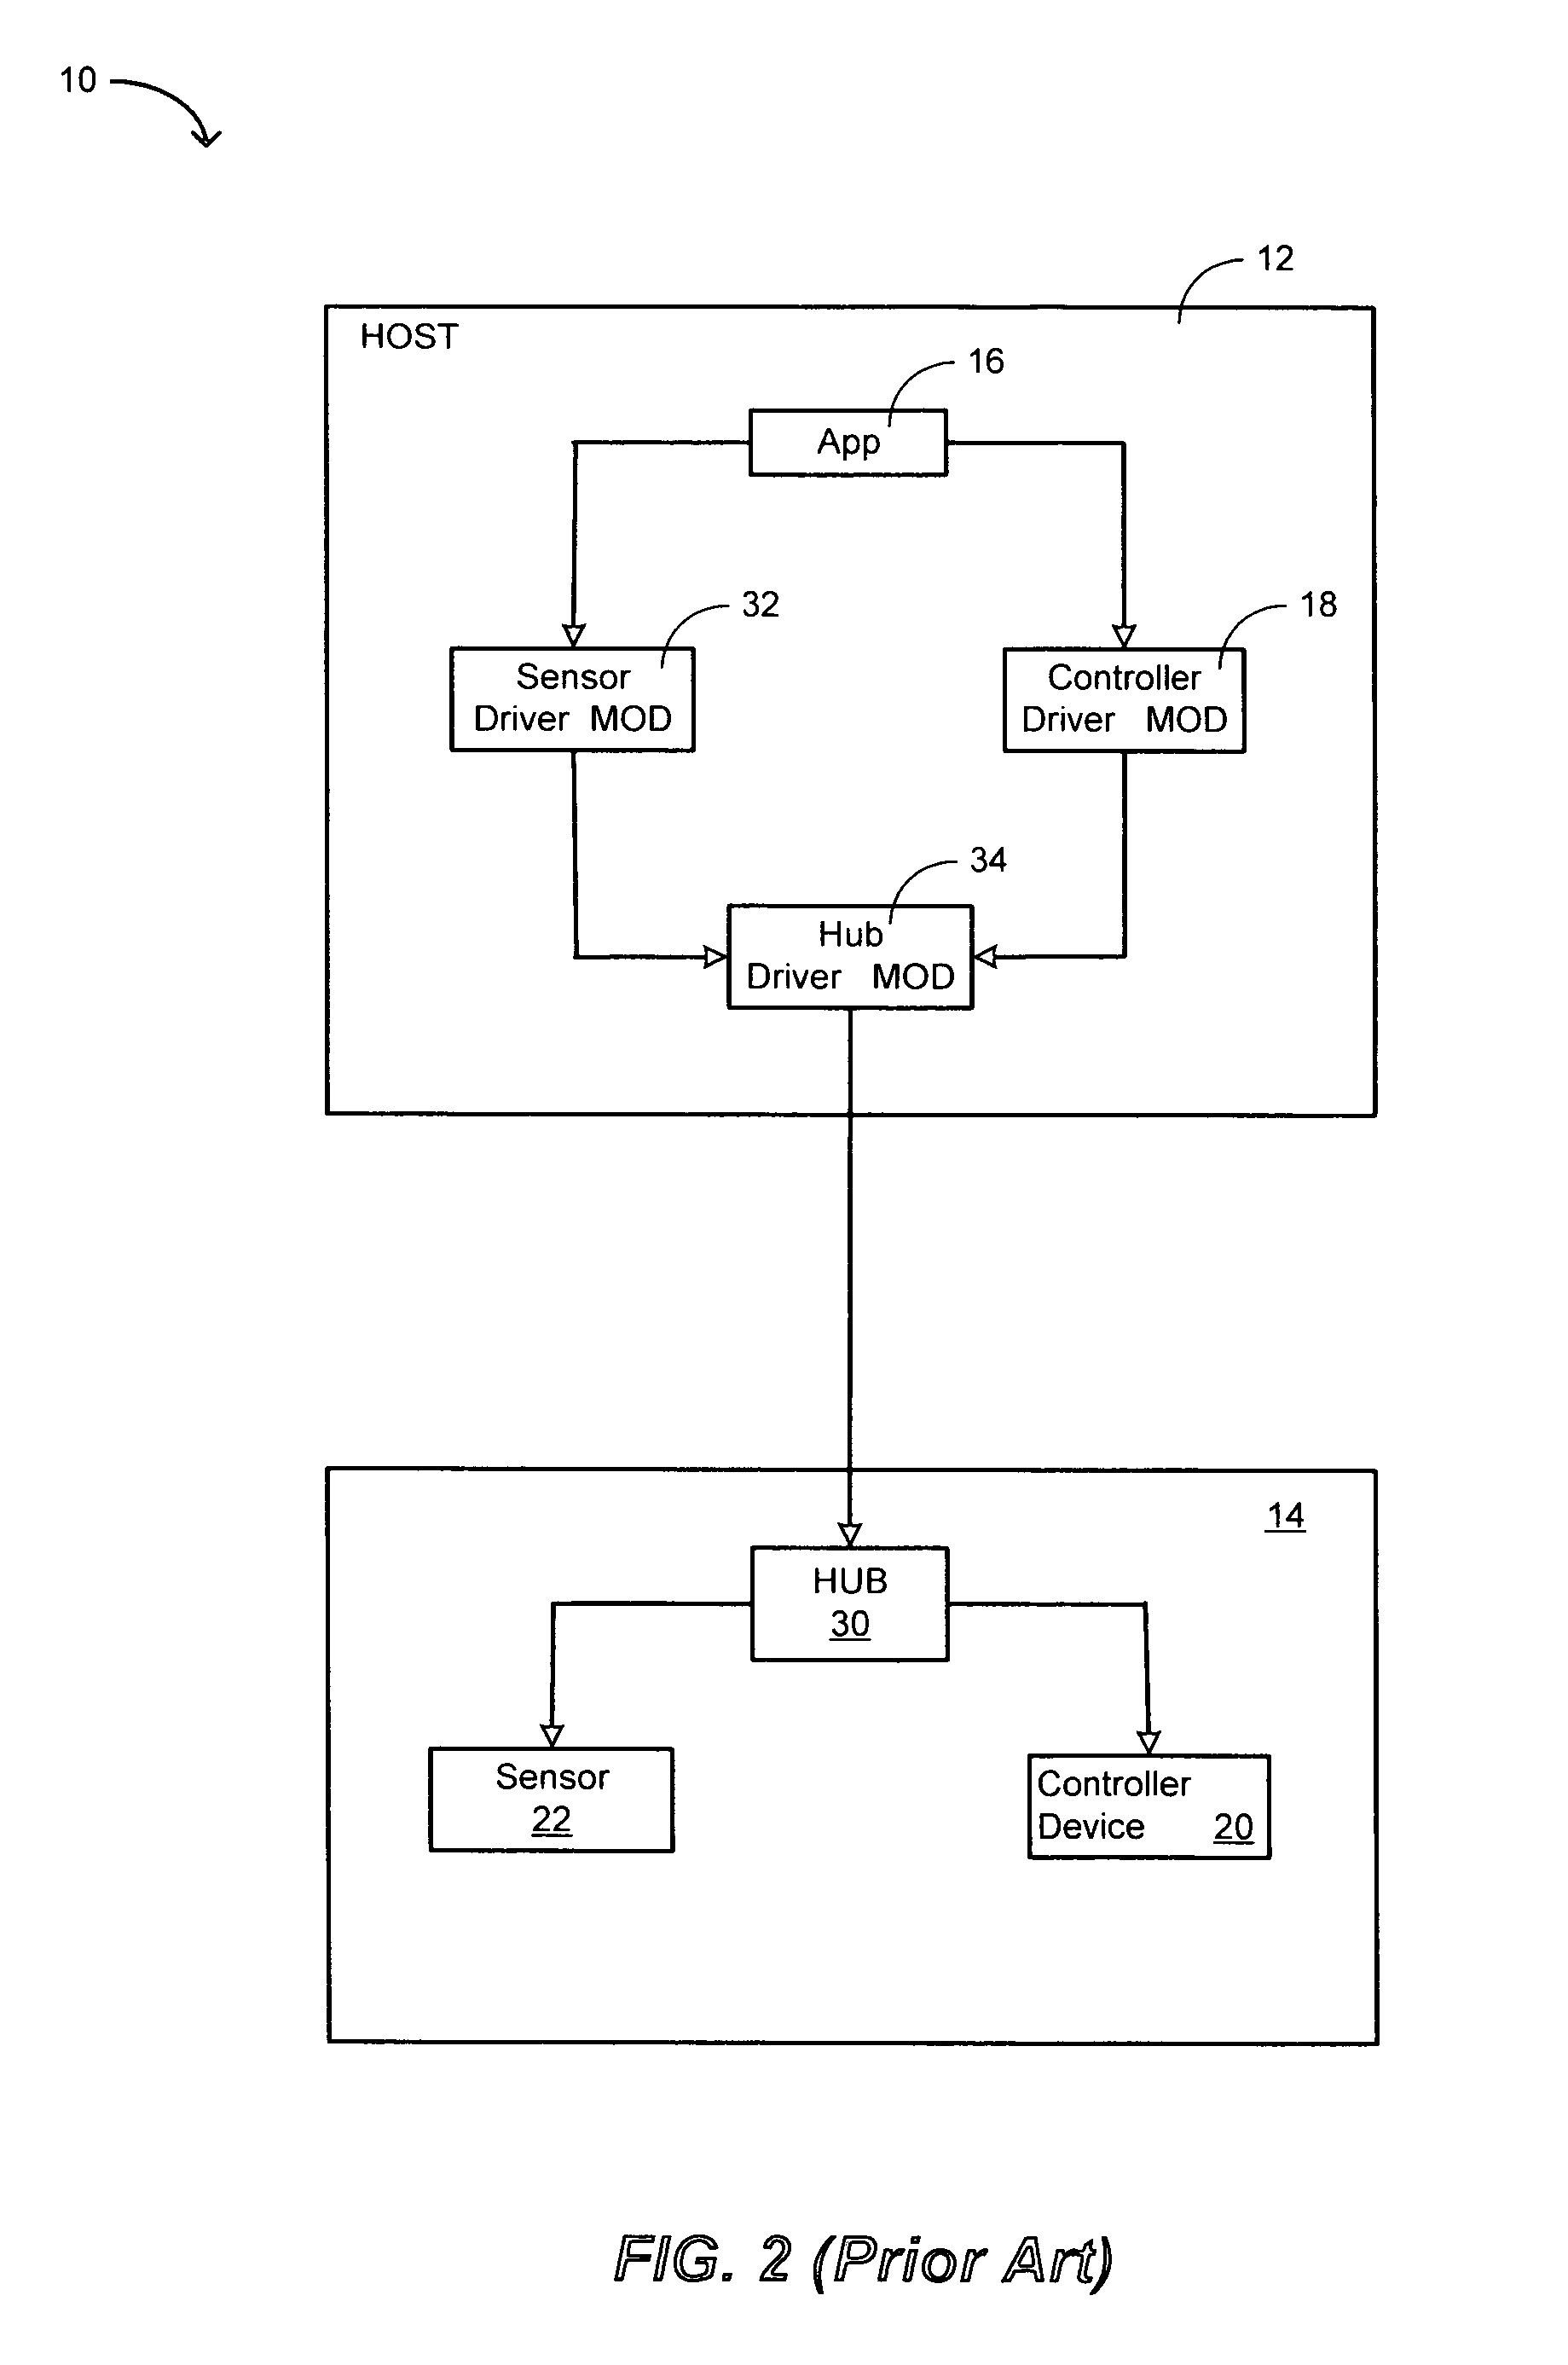 Direct secondary device interface by a host